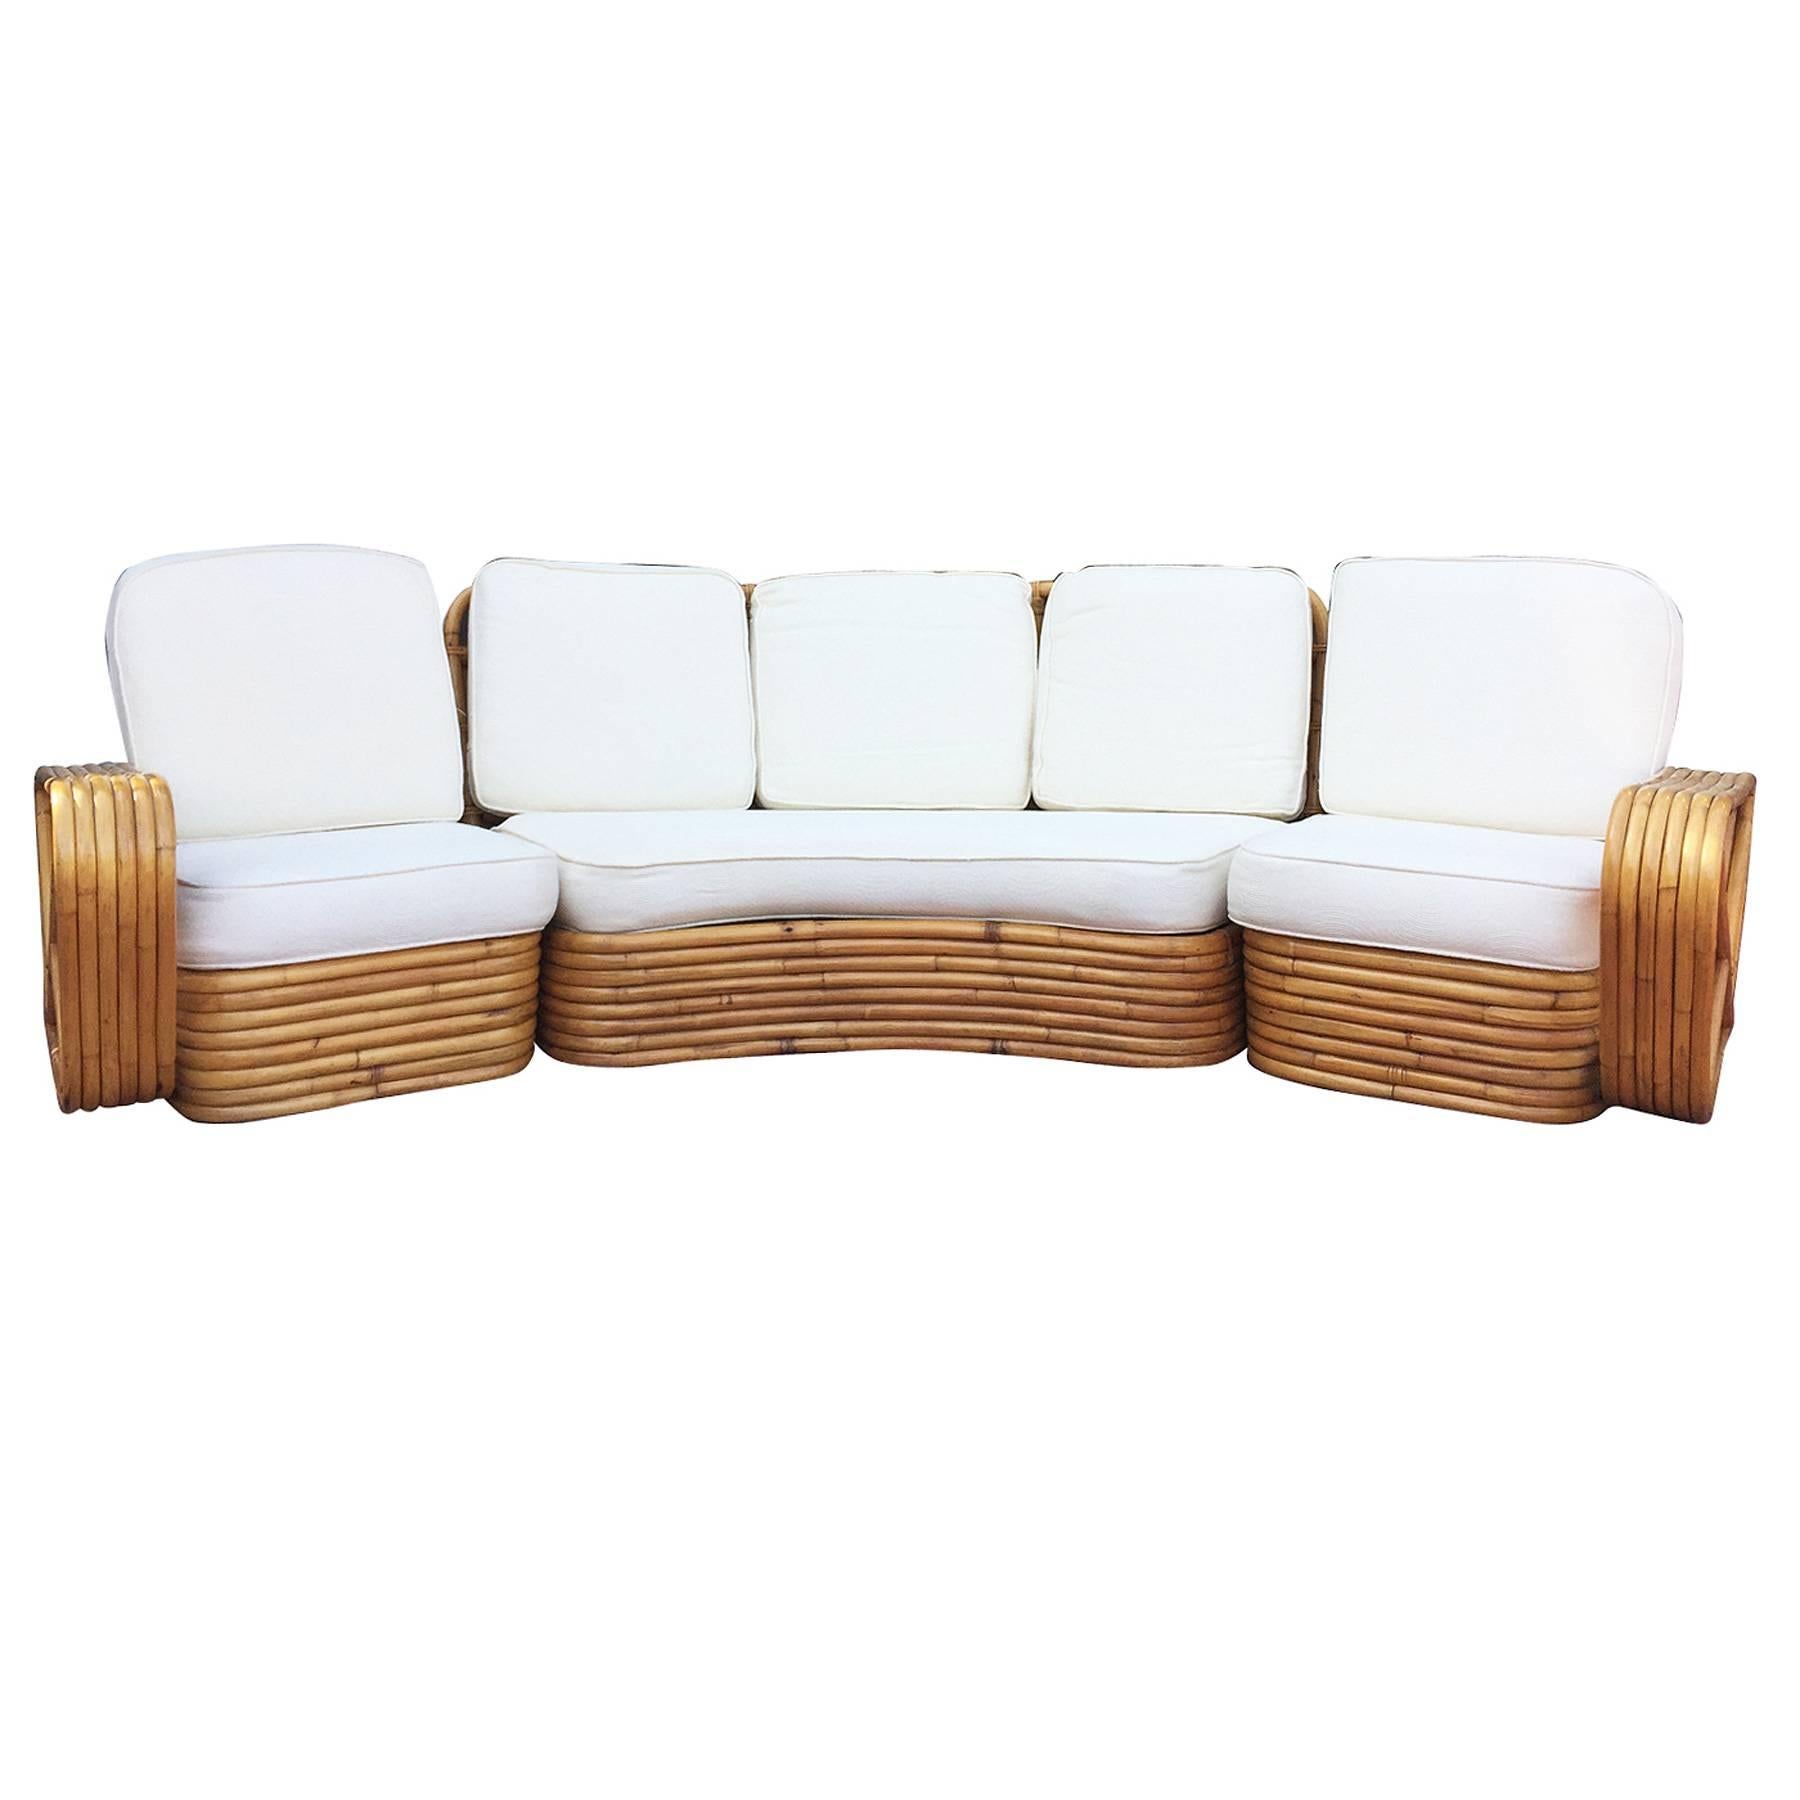 Six strand square pretzel curved rattan sectional sofa designed in the style of Paul Frankl. This sofa features a stacked rattan base with six strand square pretzel arms and is divided into a three sectionals, two end pieces that each fit one person